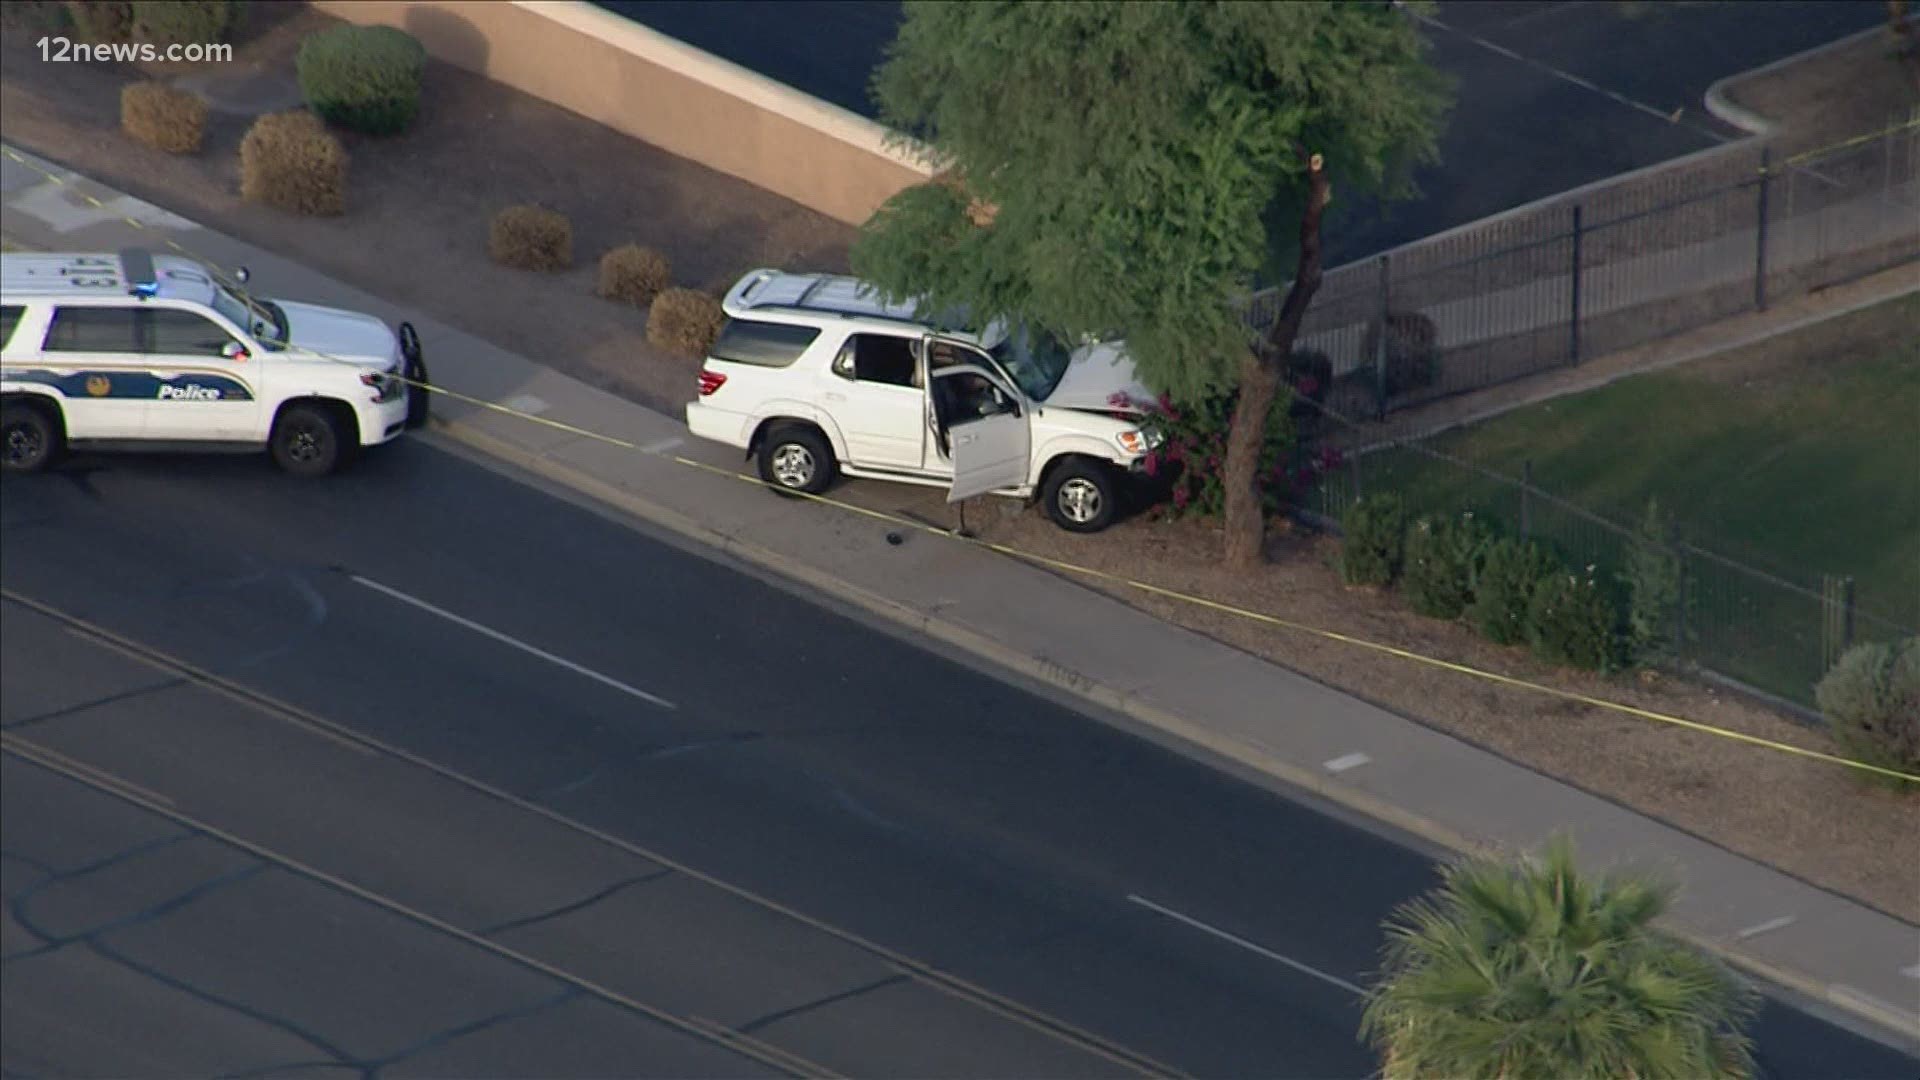 Police investigating possible road rage shooting in South Phoenix. The drivers of two cars got into an argument while driving south on 19th Ave. near Roeser Rd.